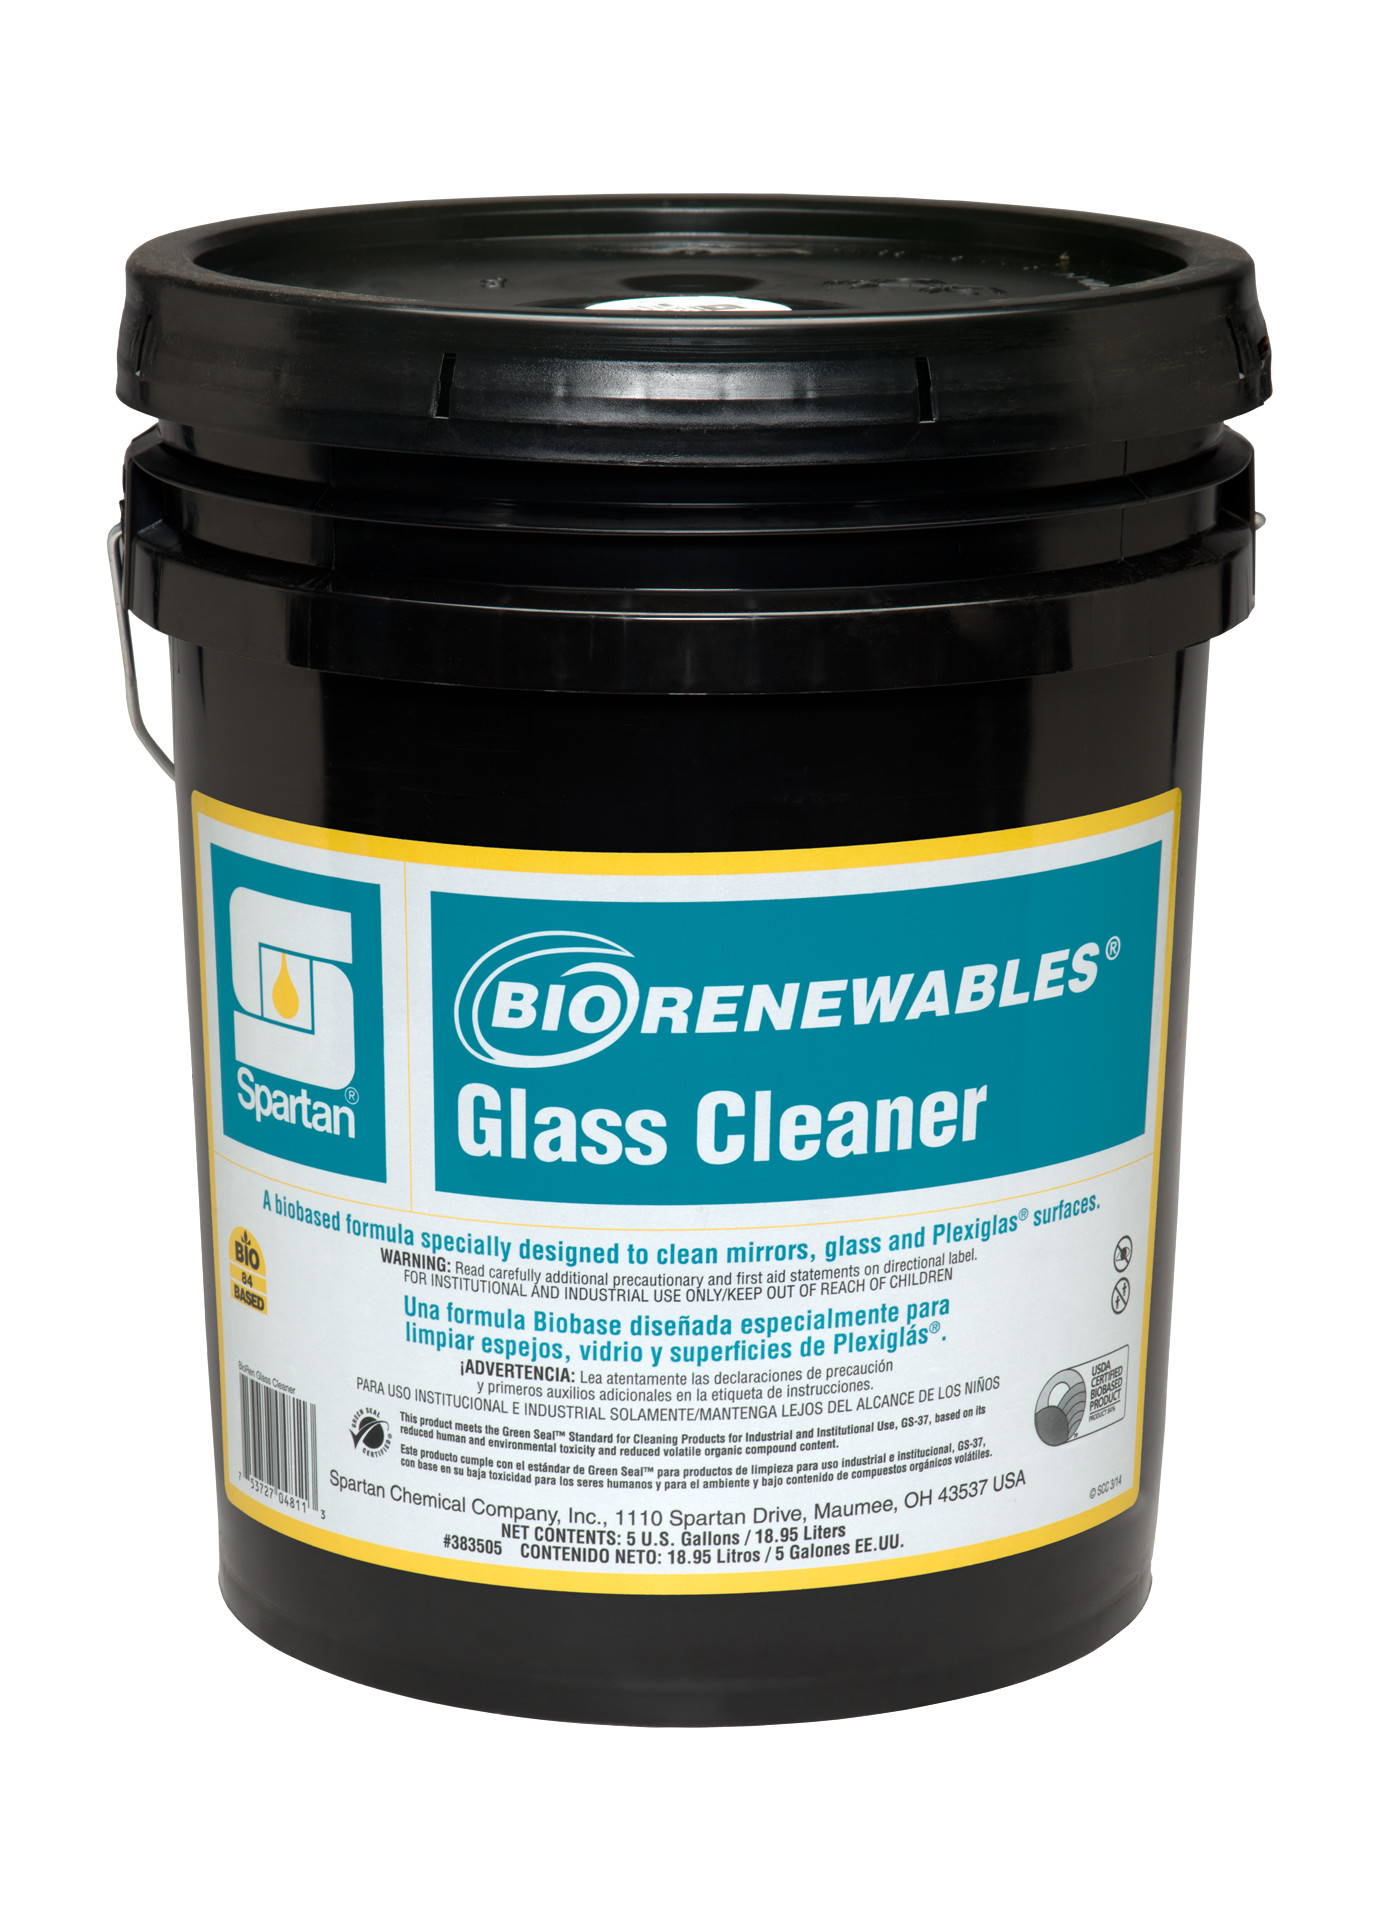 Spartan Chemical Company BioRenewables Glass Cleaner, 5 GAL PAIL